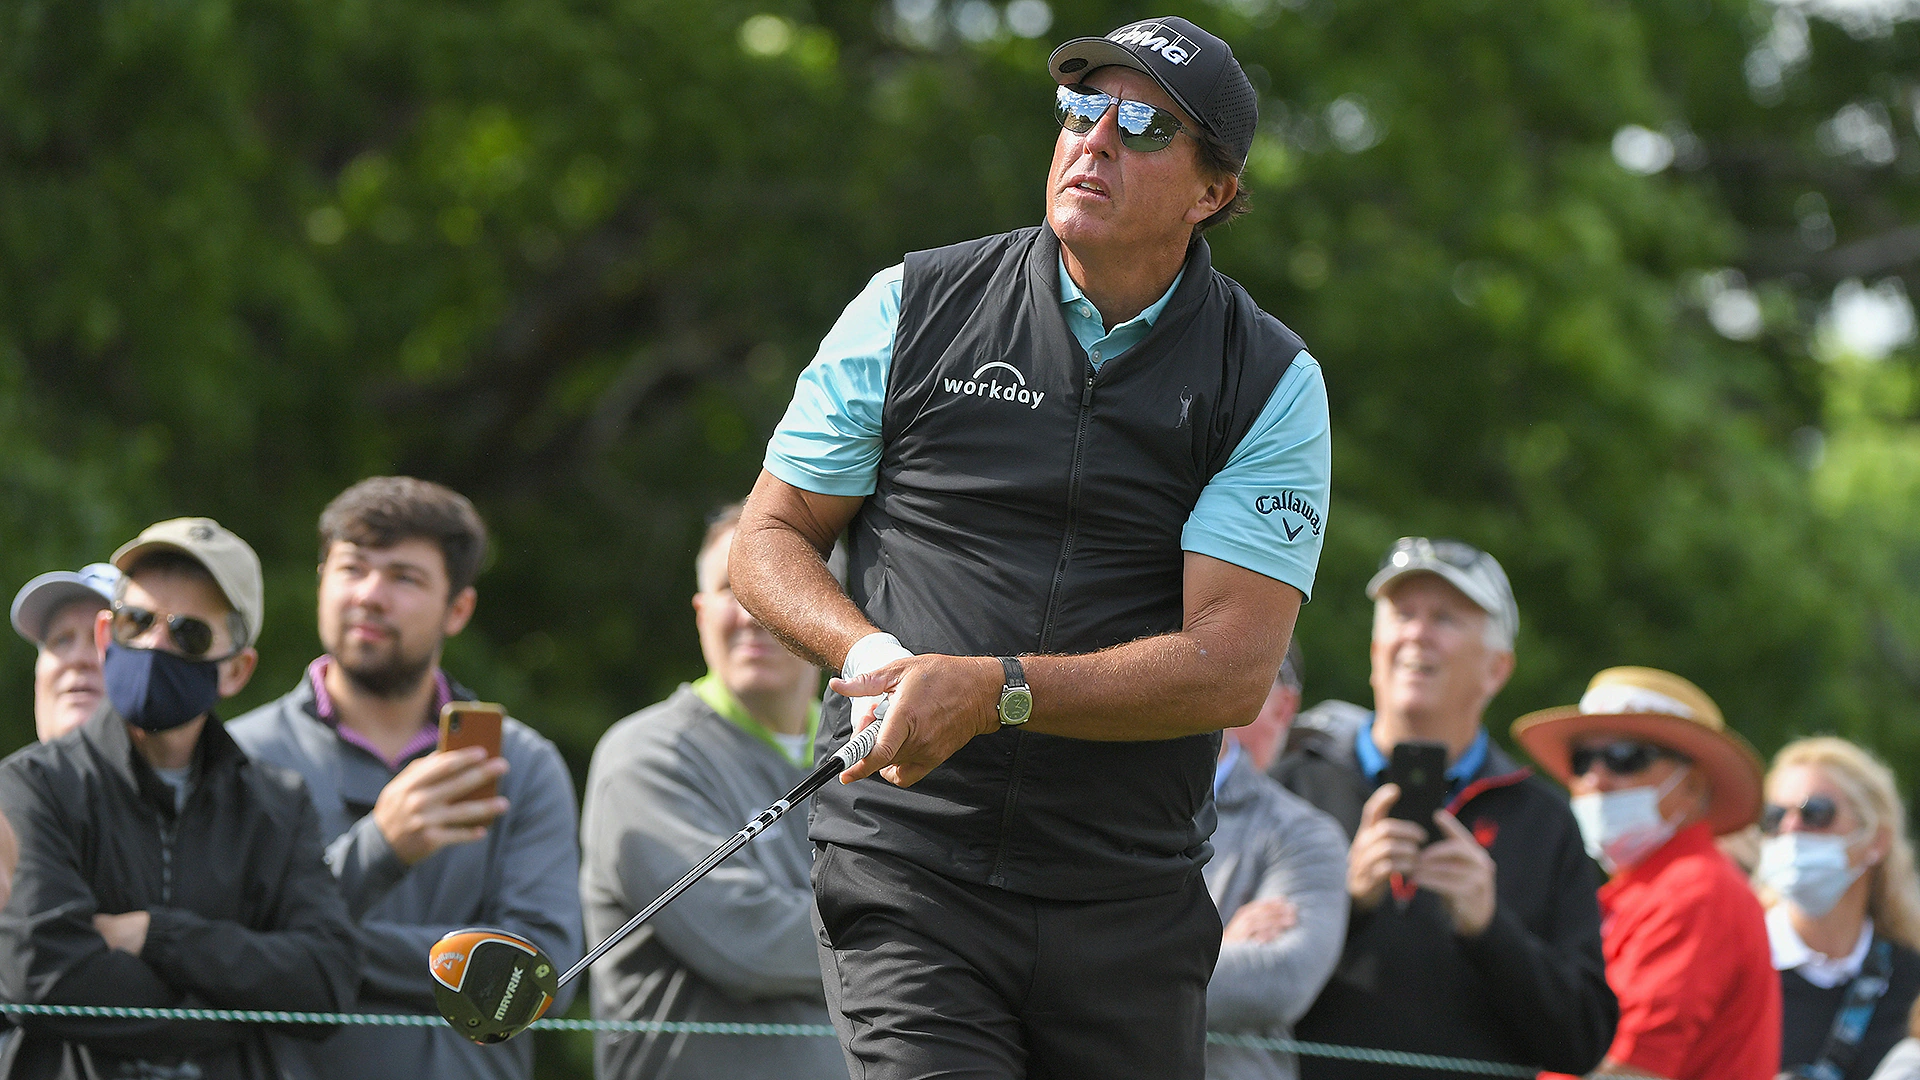 Once again, lack of focus costs Phil Mickelson, who shoots 75 on Friday at Wells Fargo